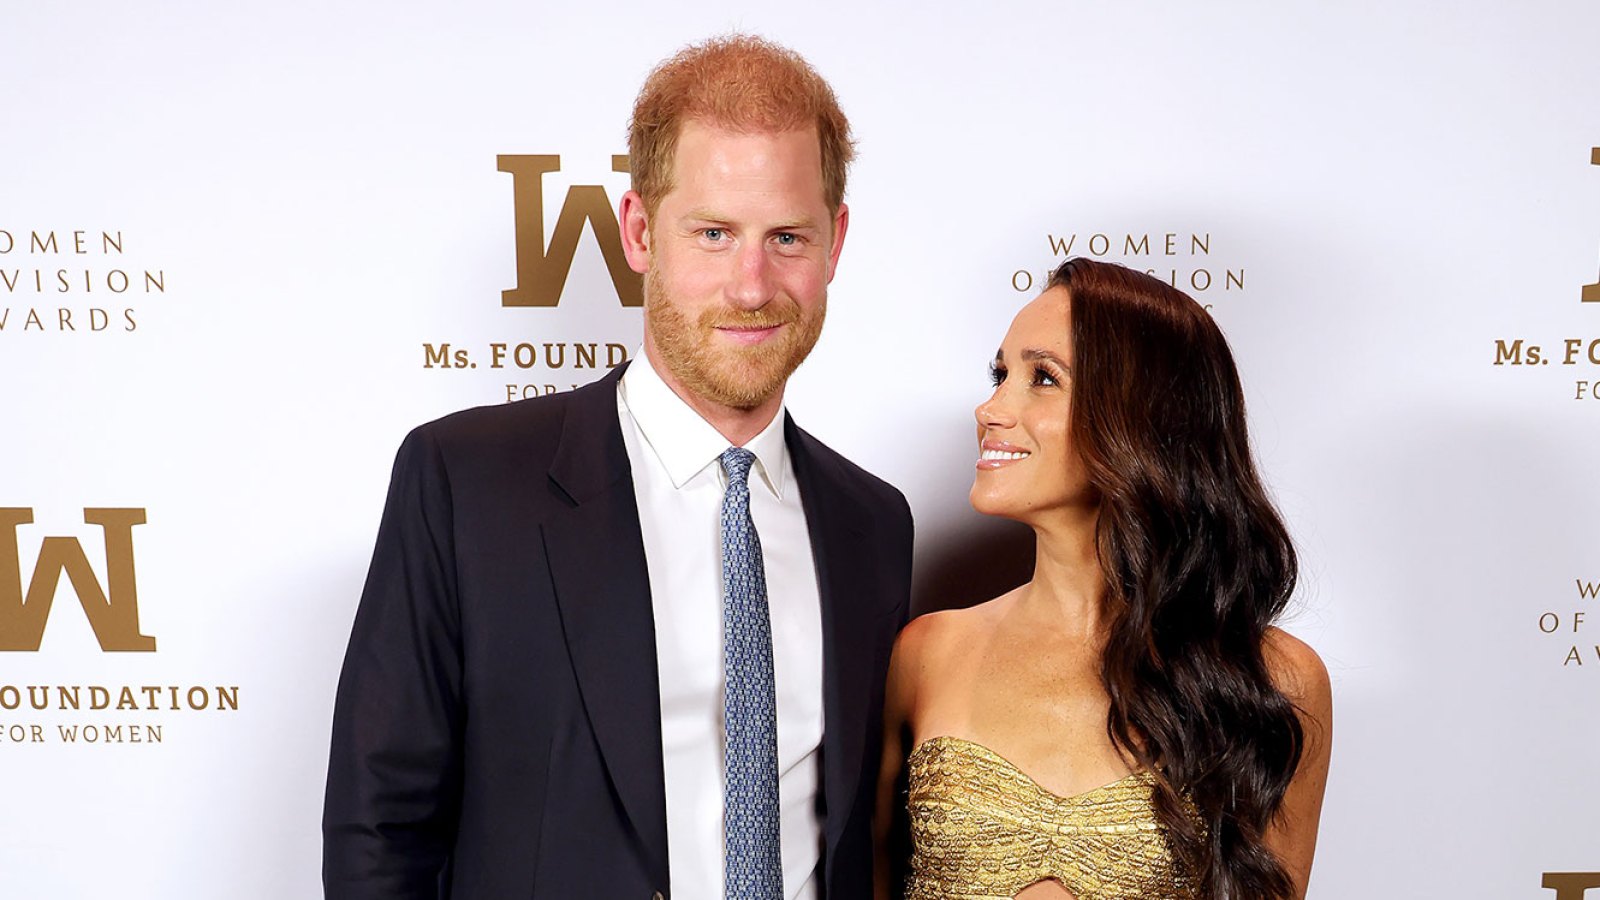 Royal Family Website Removes Prince Harry 2016 Statement Confirming Meghan Markle Romance